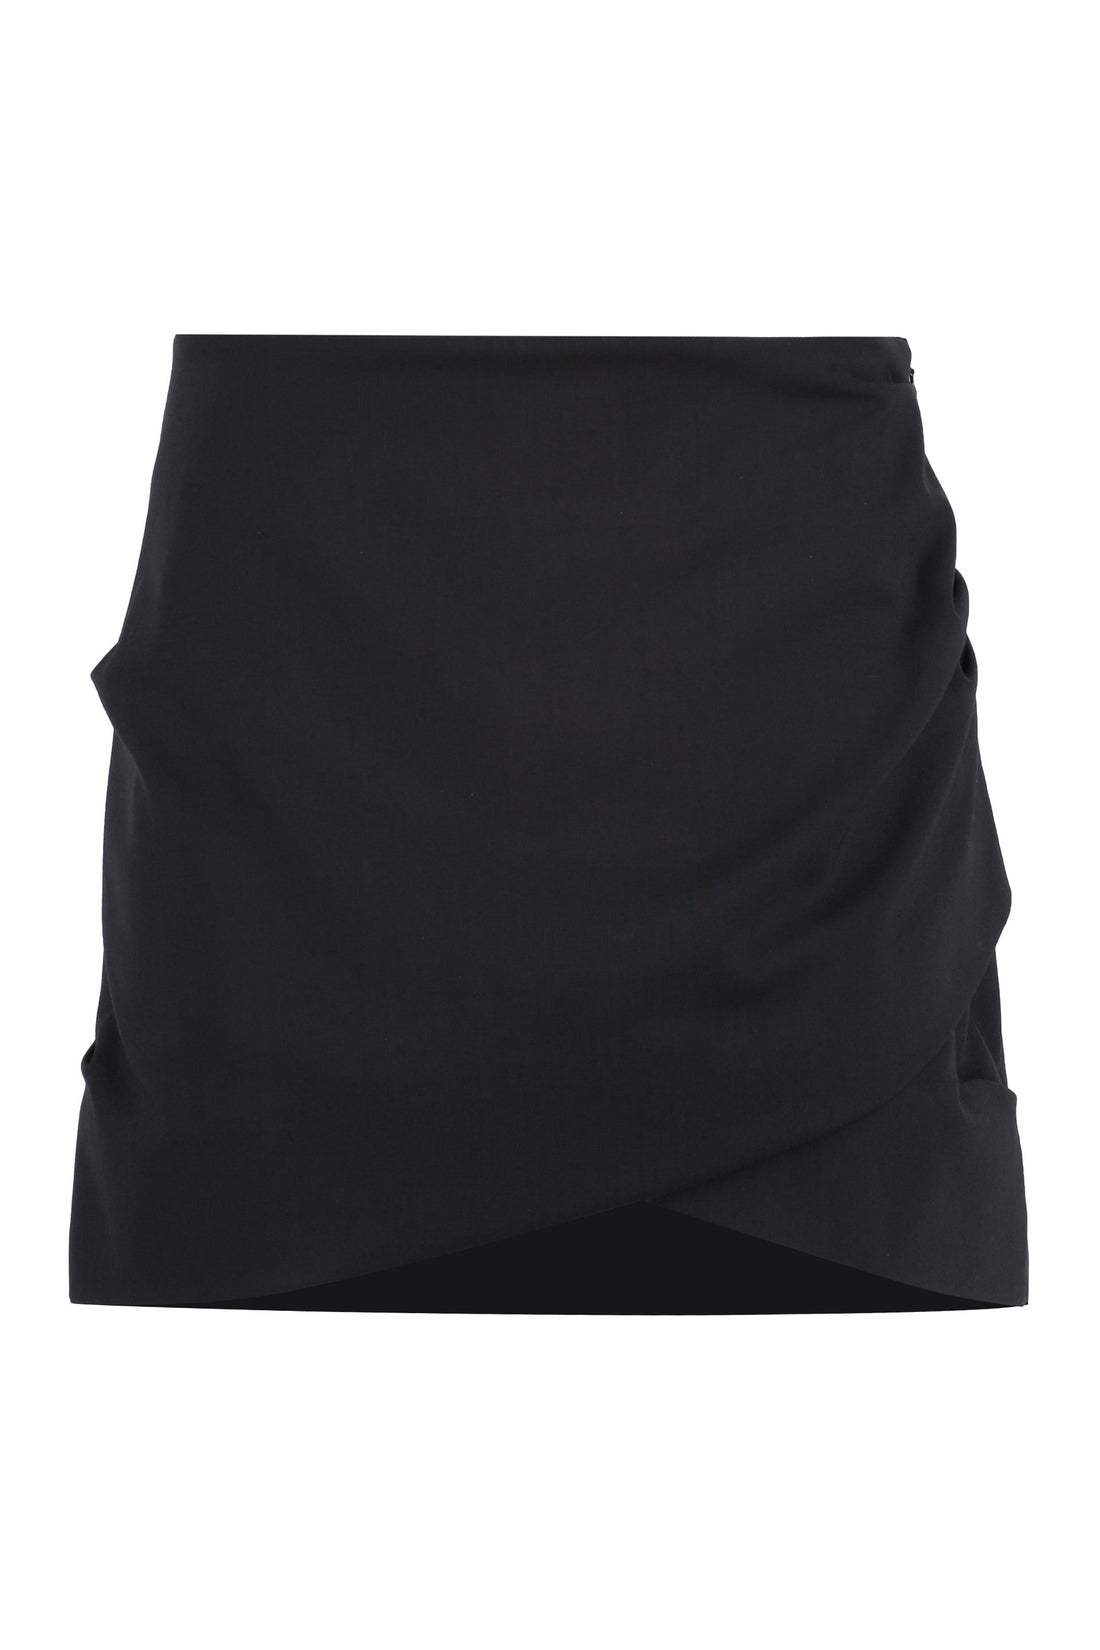 Off-White-OUTLET-SALE-Wool-blend mini skirt-ARCHIVIST